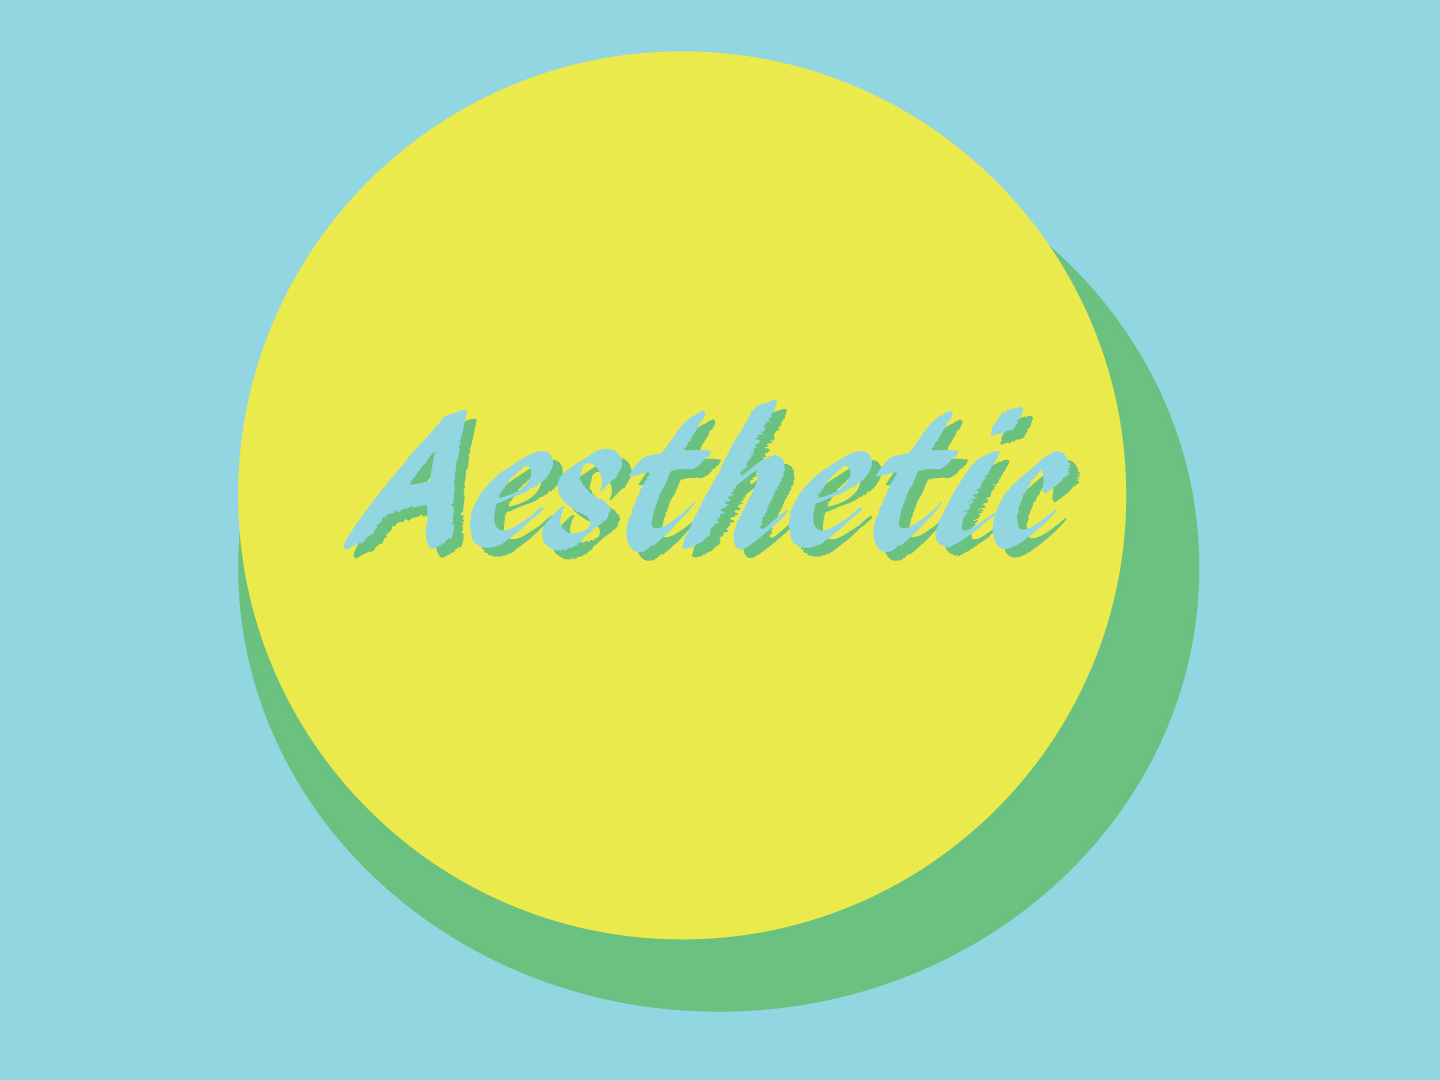 Aesthetic by Justin Helms on Dribbble